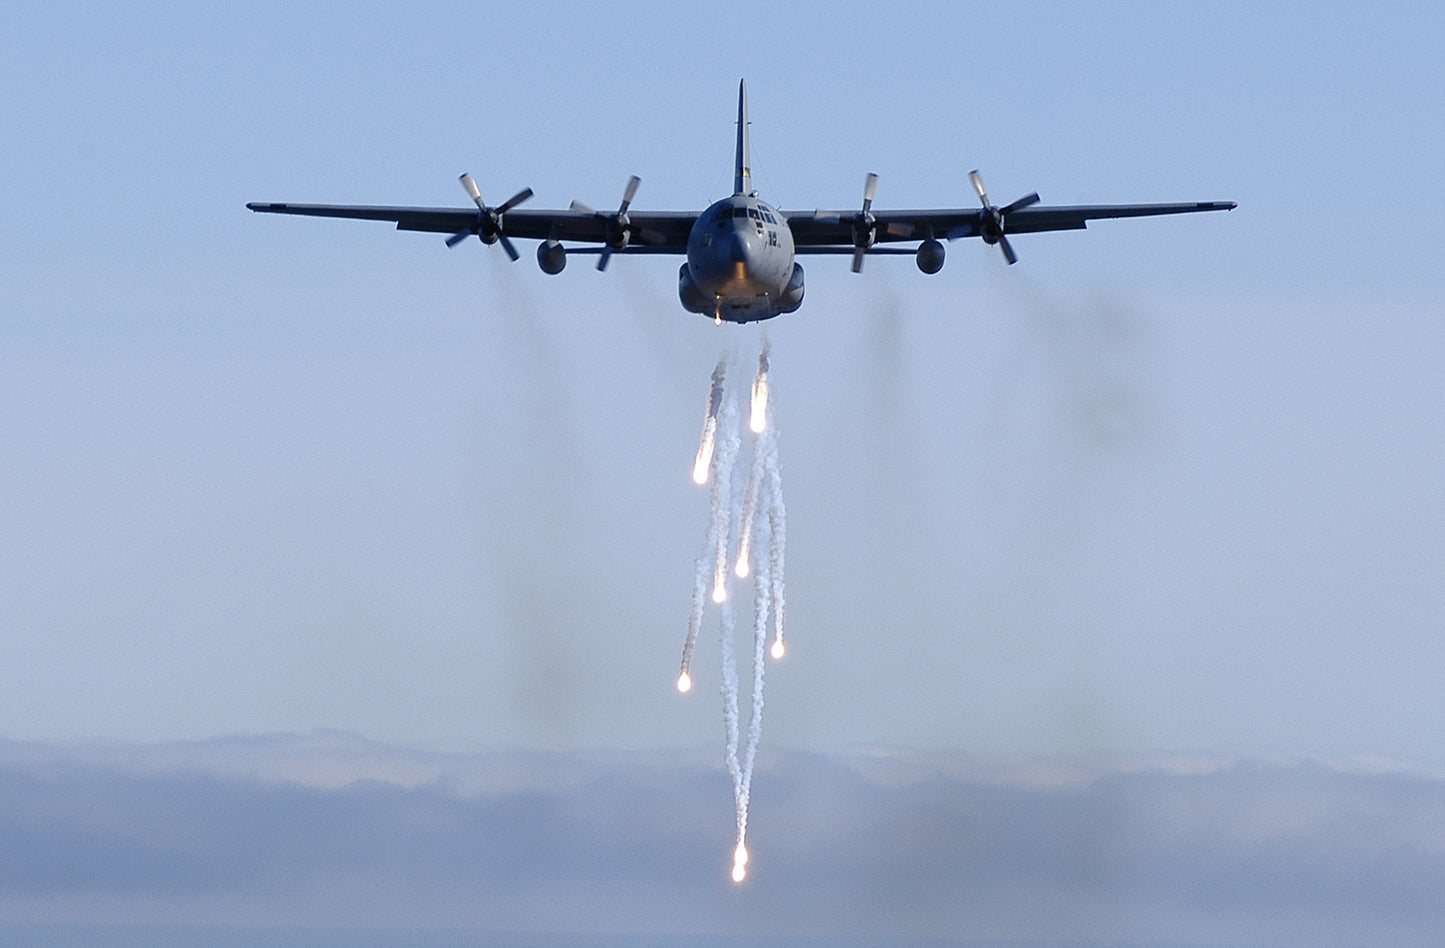 LOCKHEED C-130 HERCULES GLOSSY POSTER PICTURE PHOTO PRINT BANNER